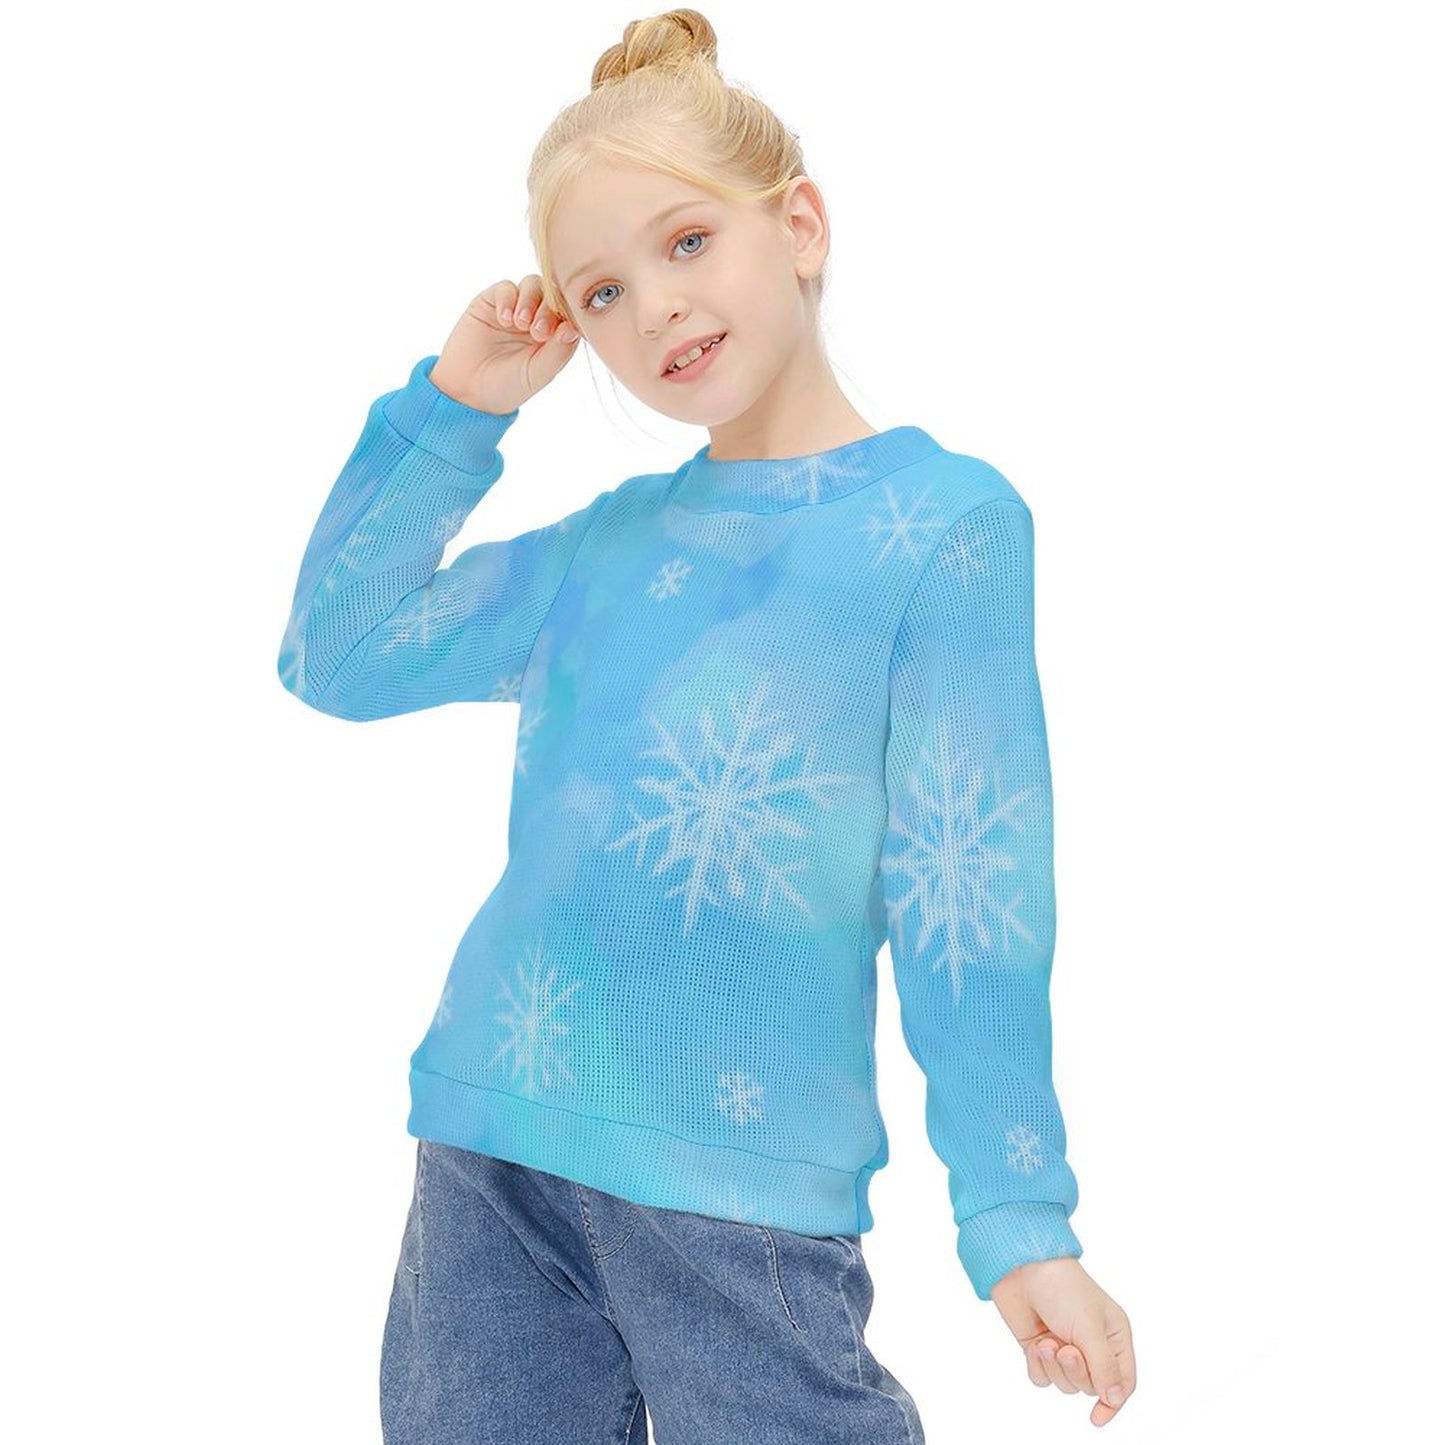 Online Customize Girl's Crewneck Sweater Blue Tie-dyed Snowflake